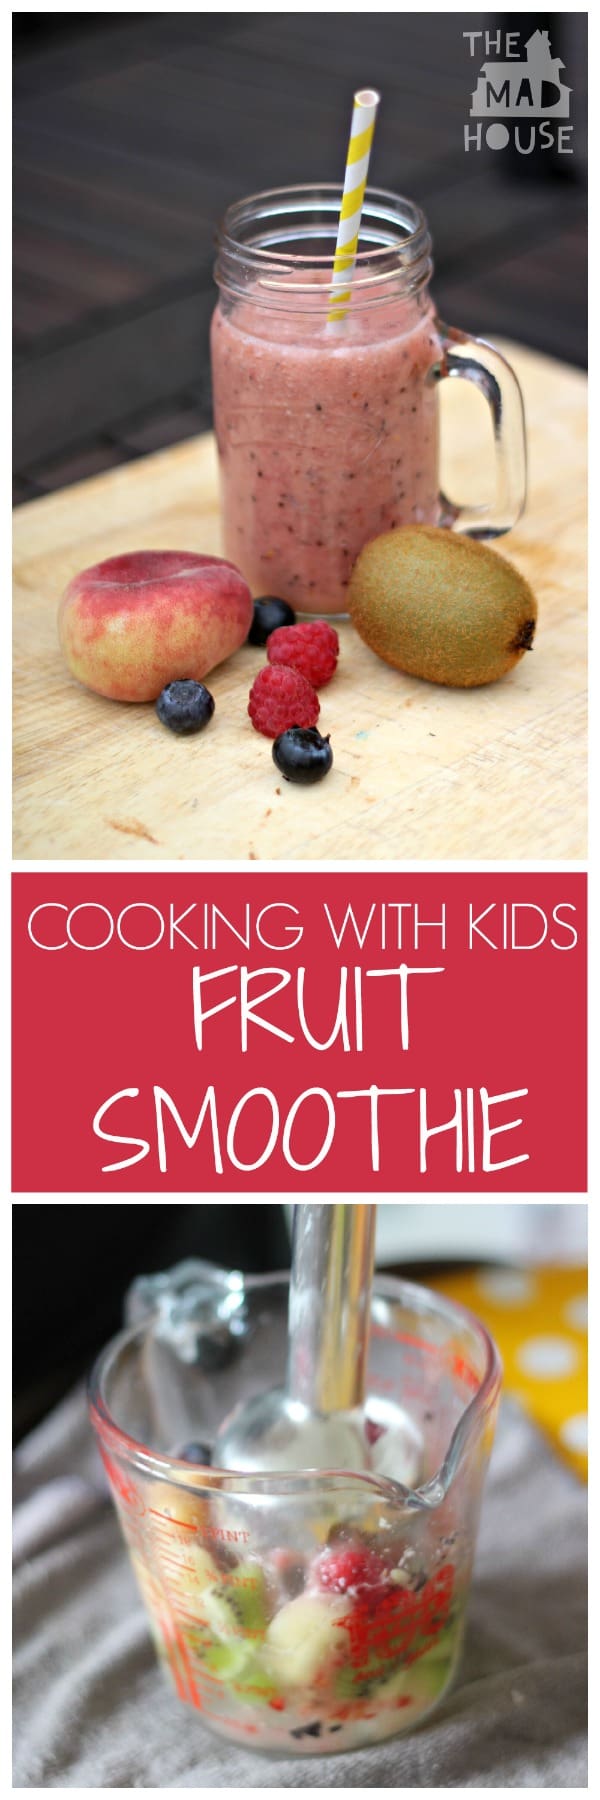 cooking with kids fruit smoothie